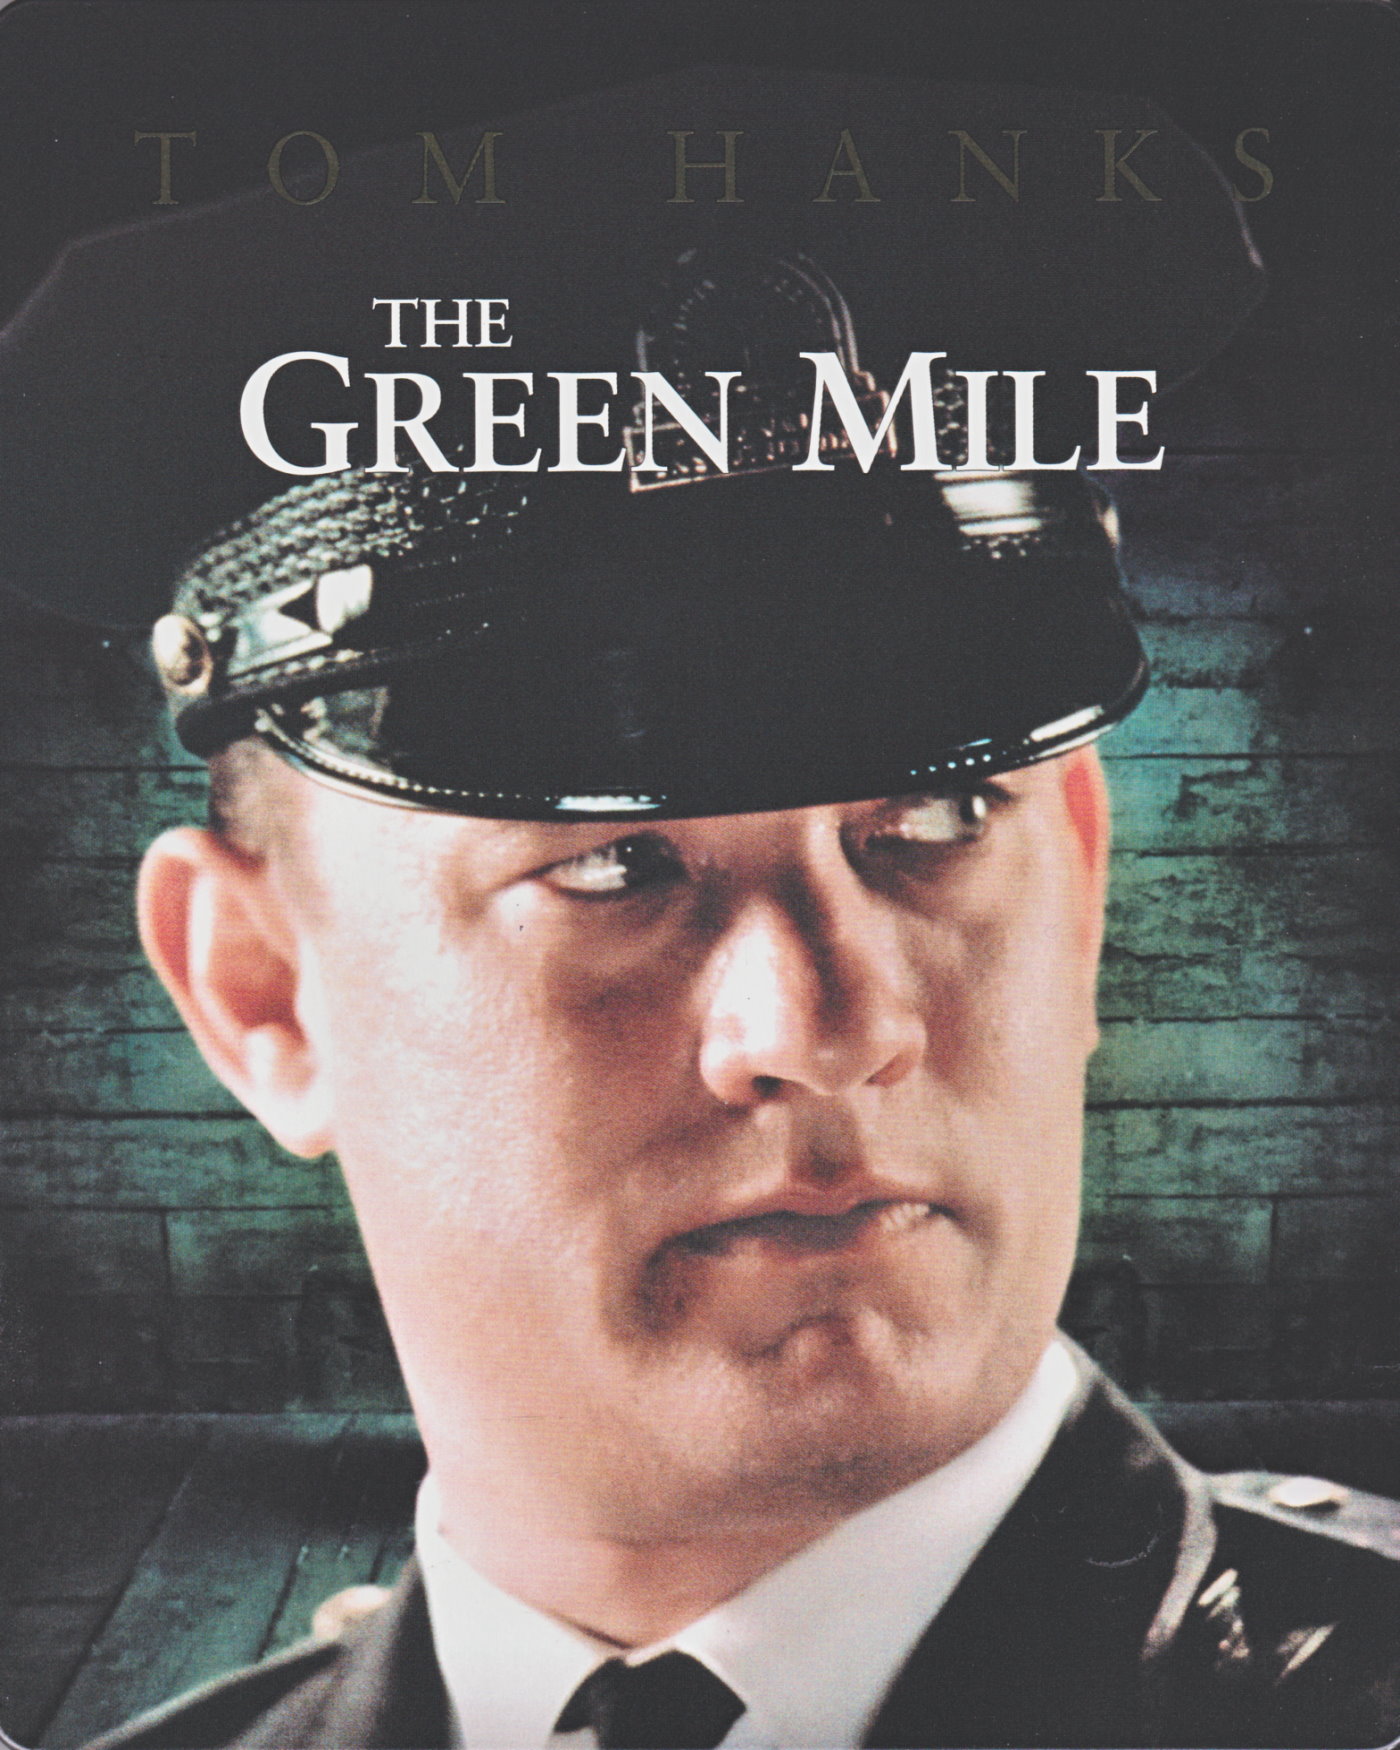 Cover - The Green Mile.jpg